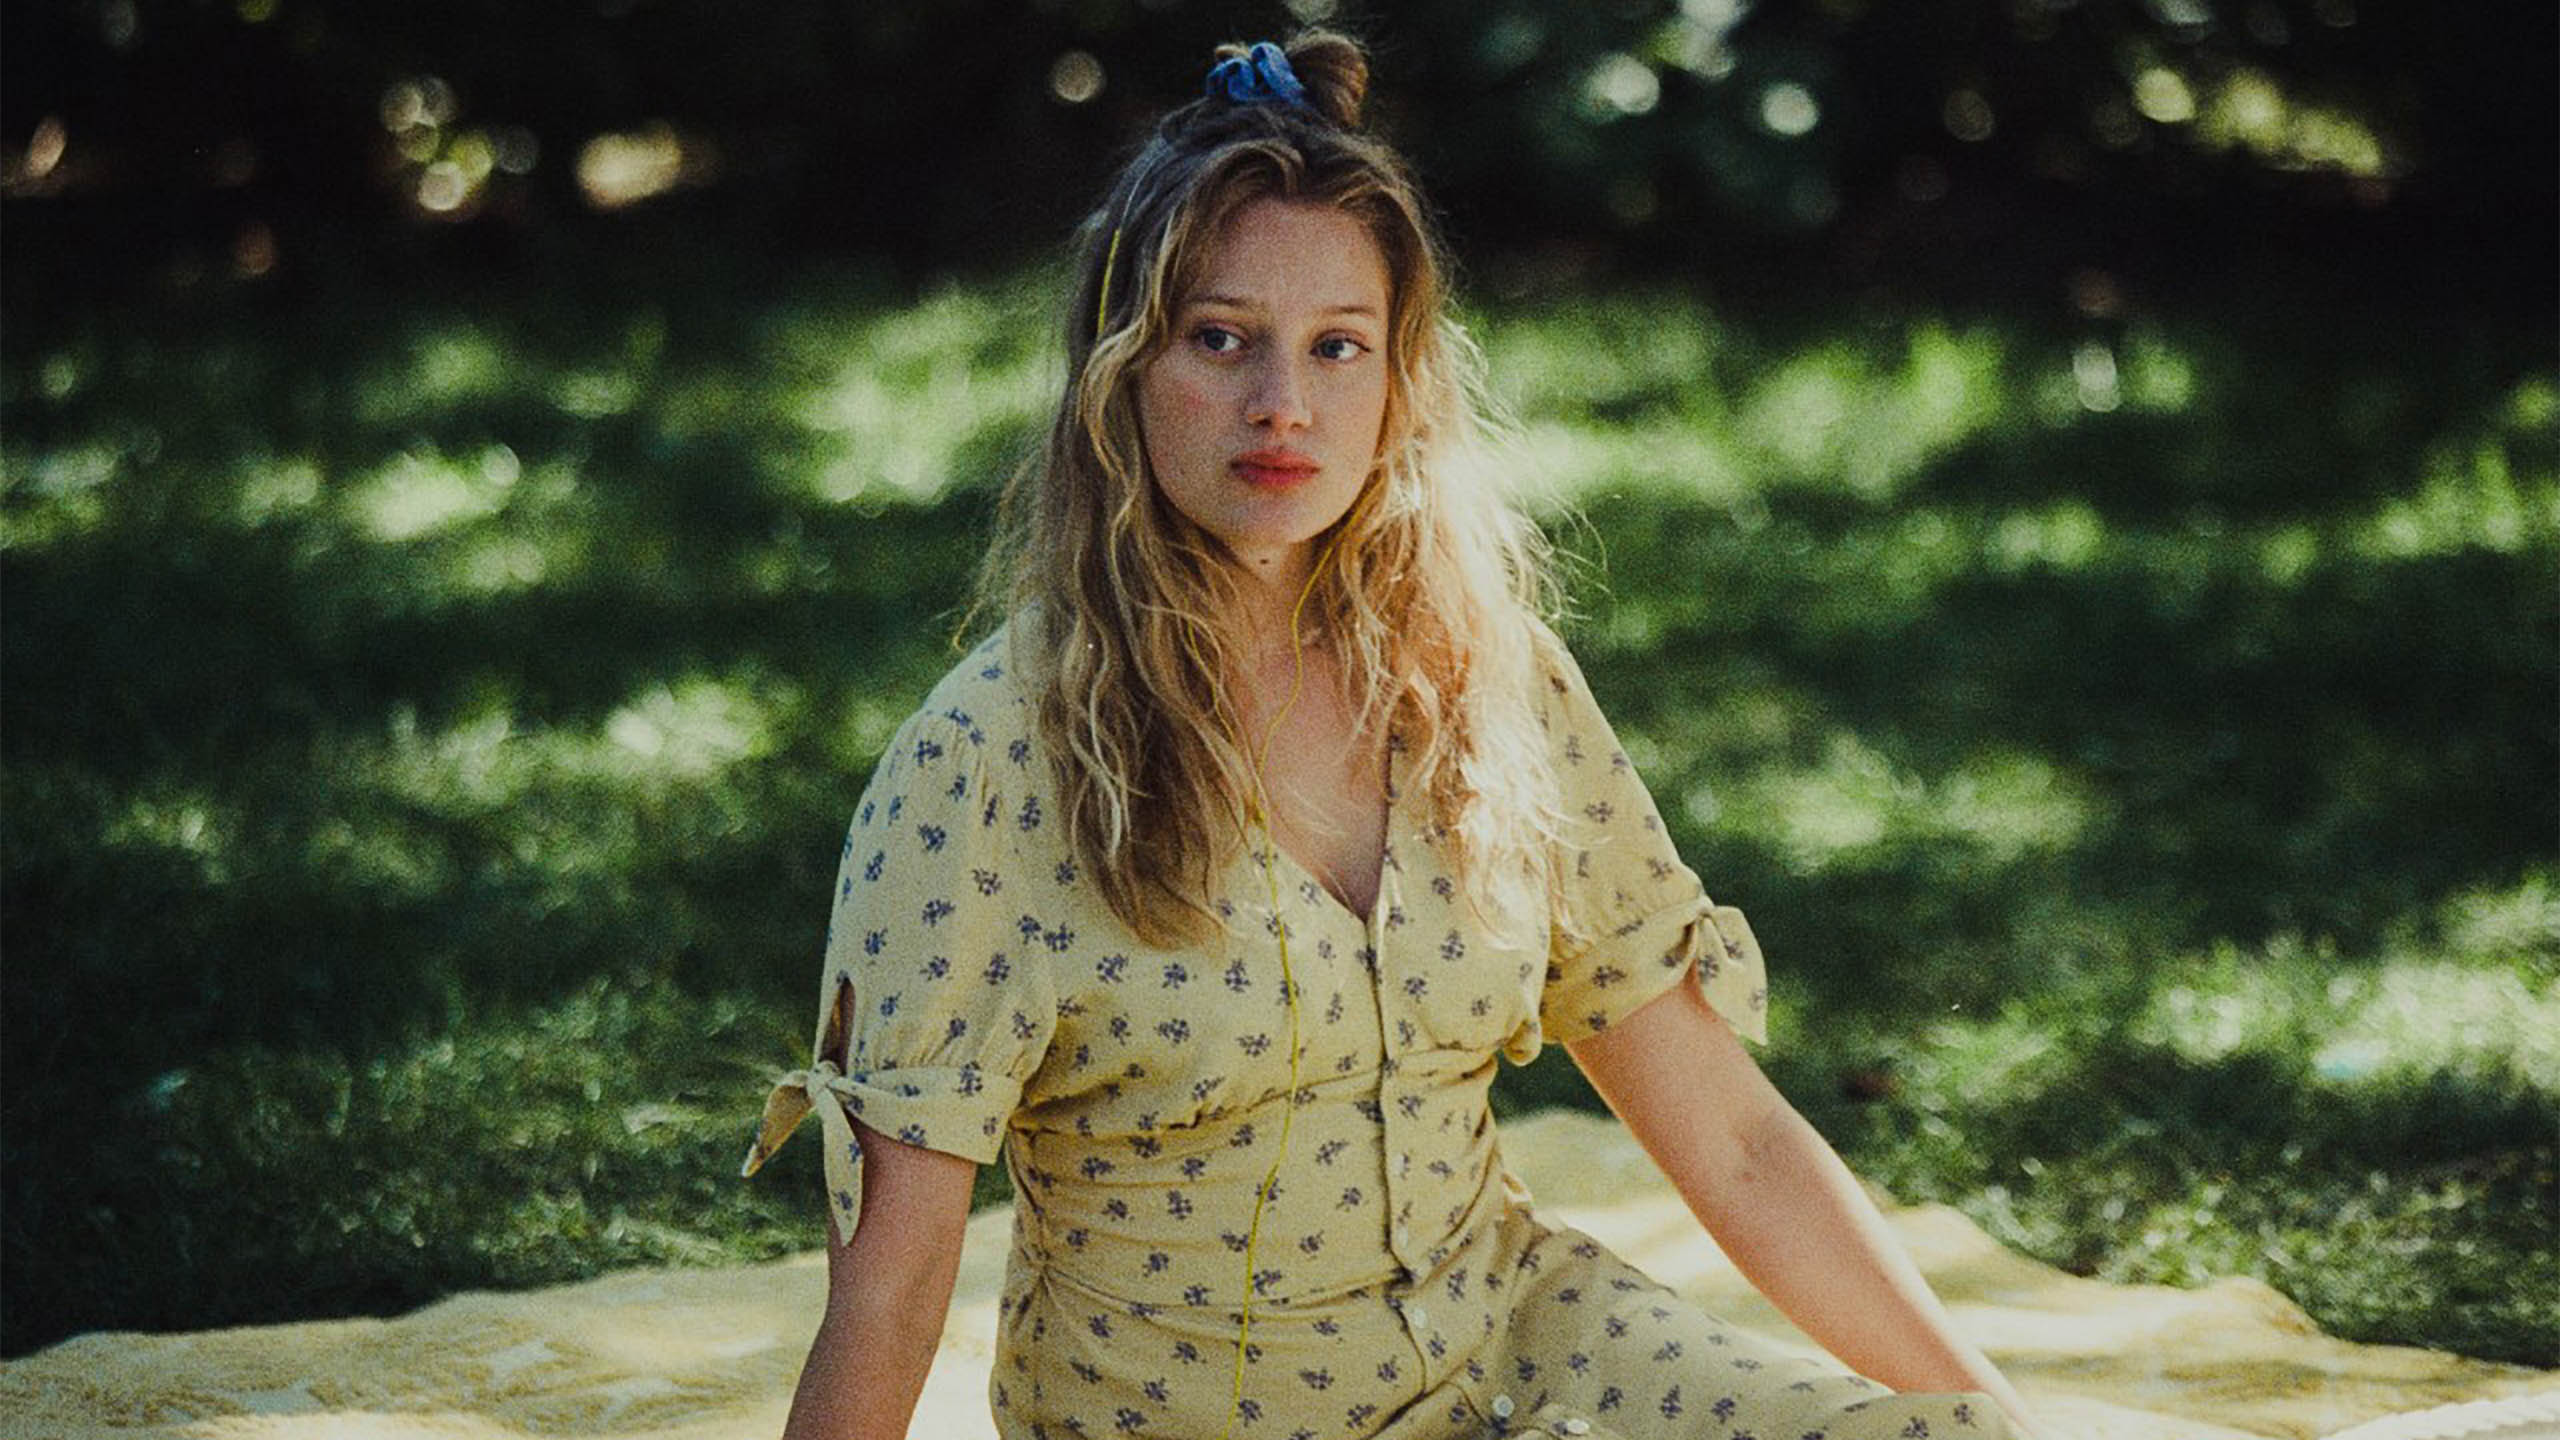 A blonde woman in a yellow dress sits in a blanket in the grass